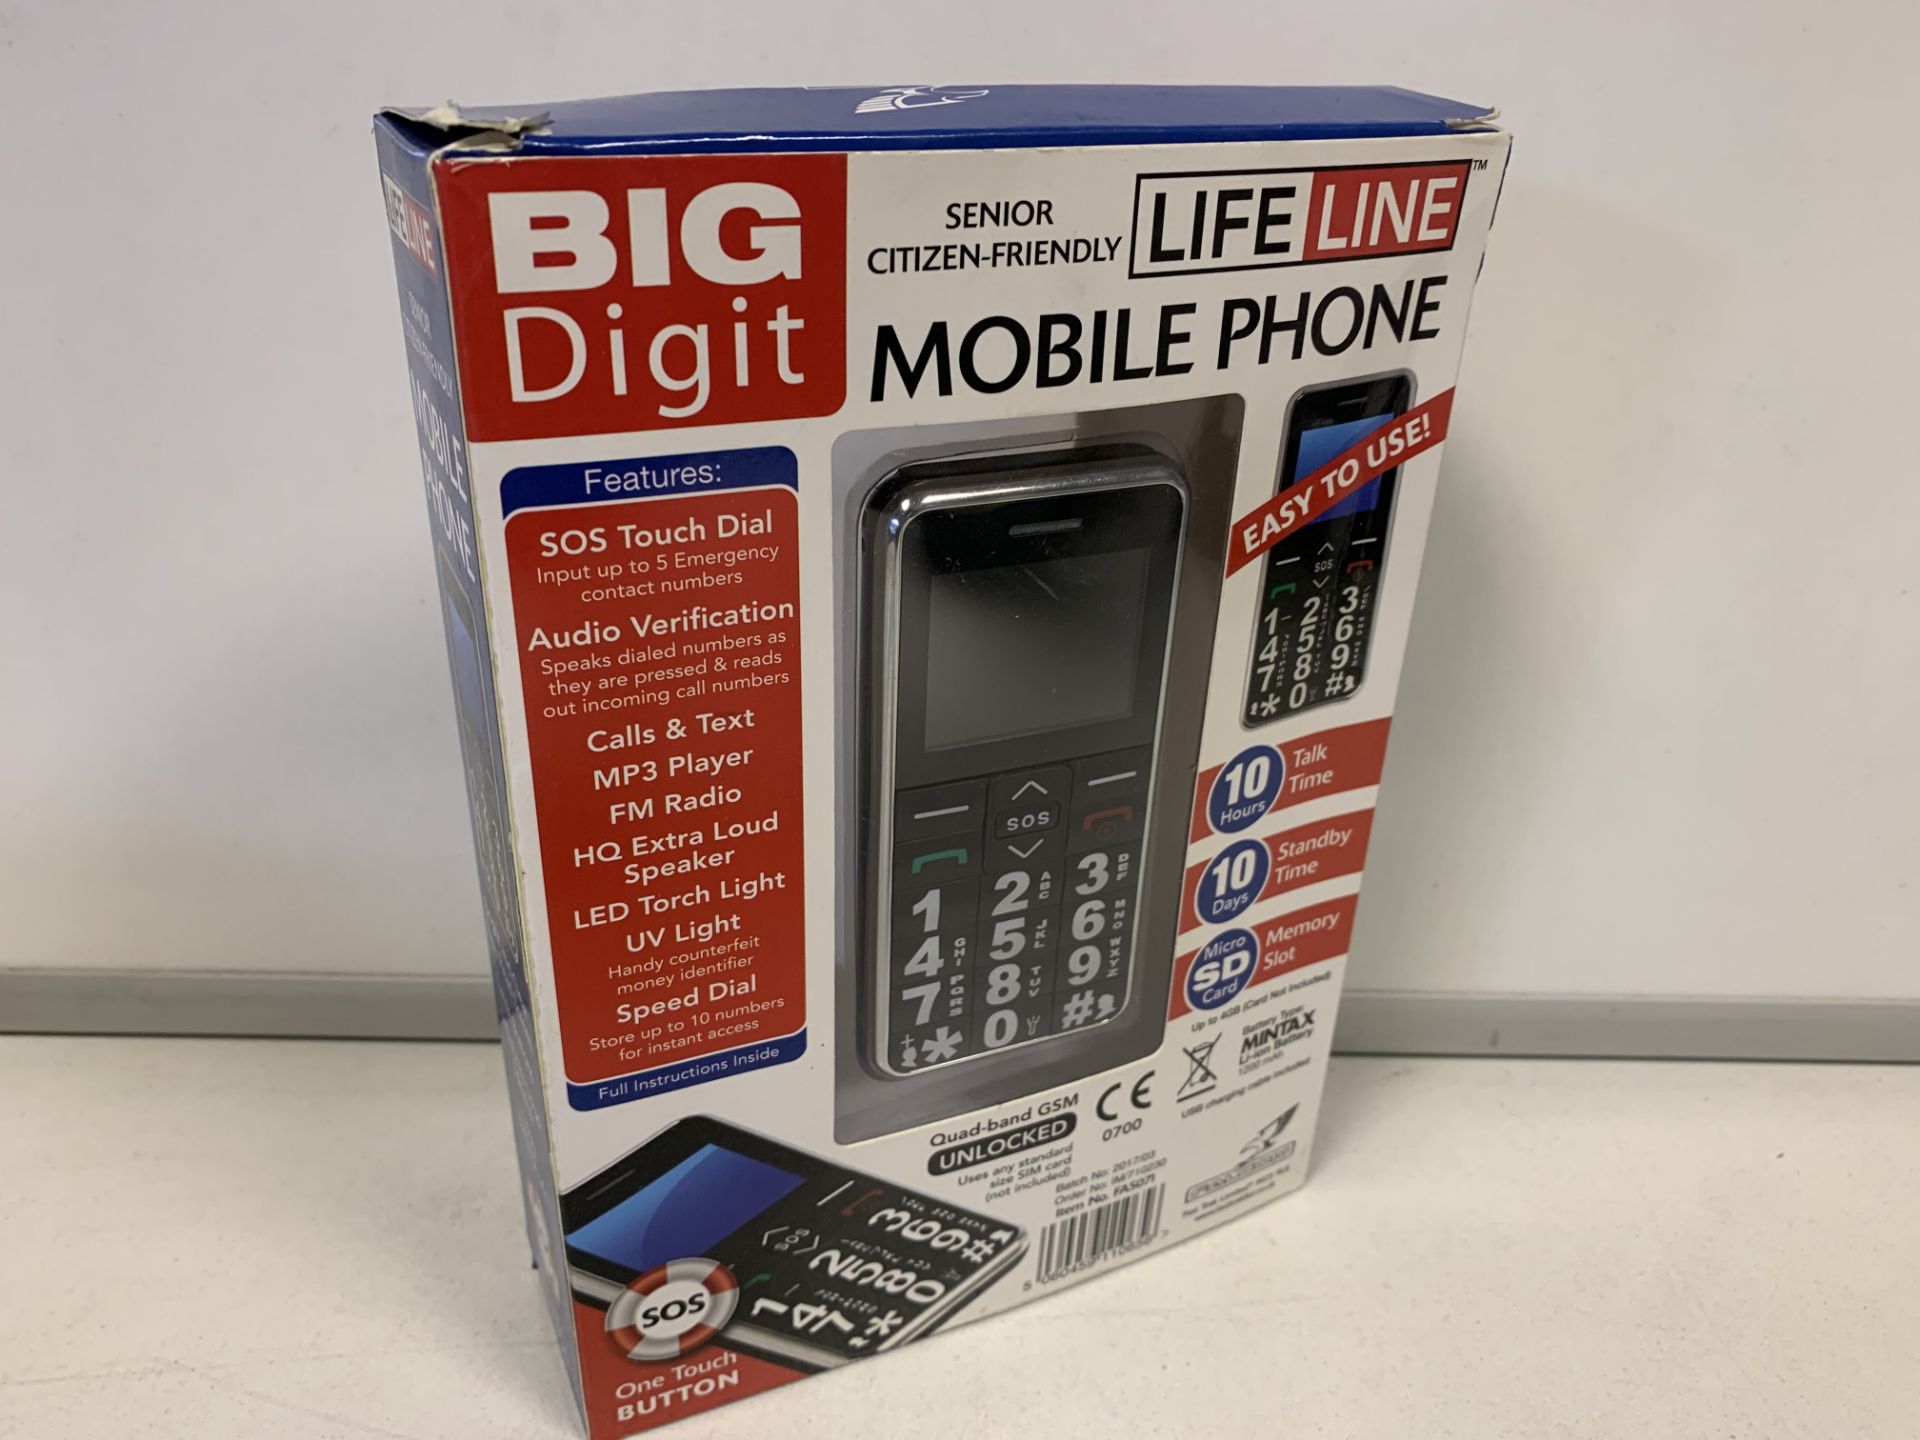 2 x NEW LIFELINE BIG DIGIT MOBILE PHONES - 10 HOURS TALK TIME, 10 HOURS STANDBY TIME.